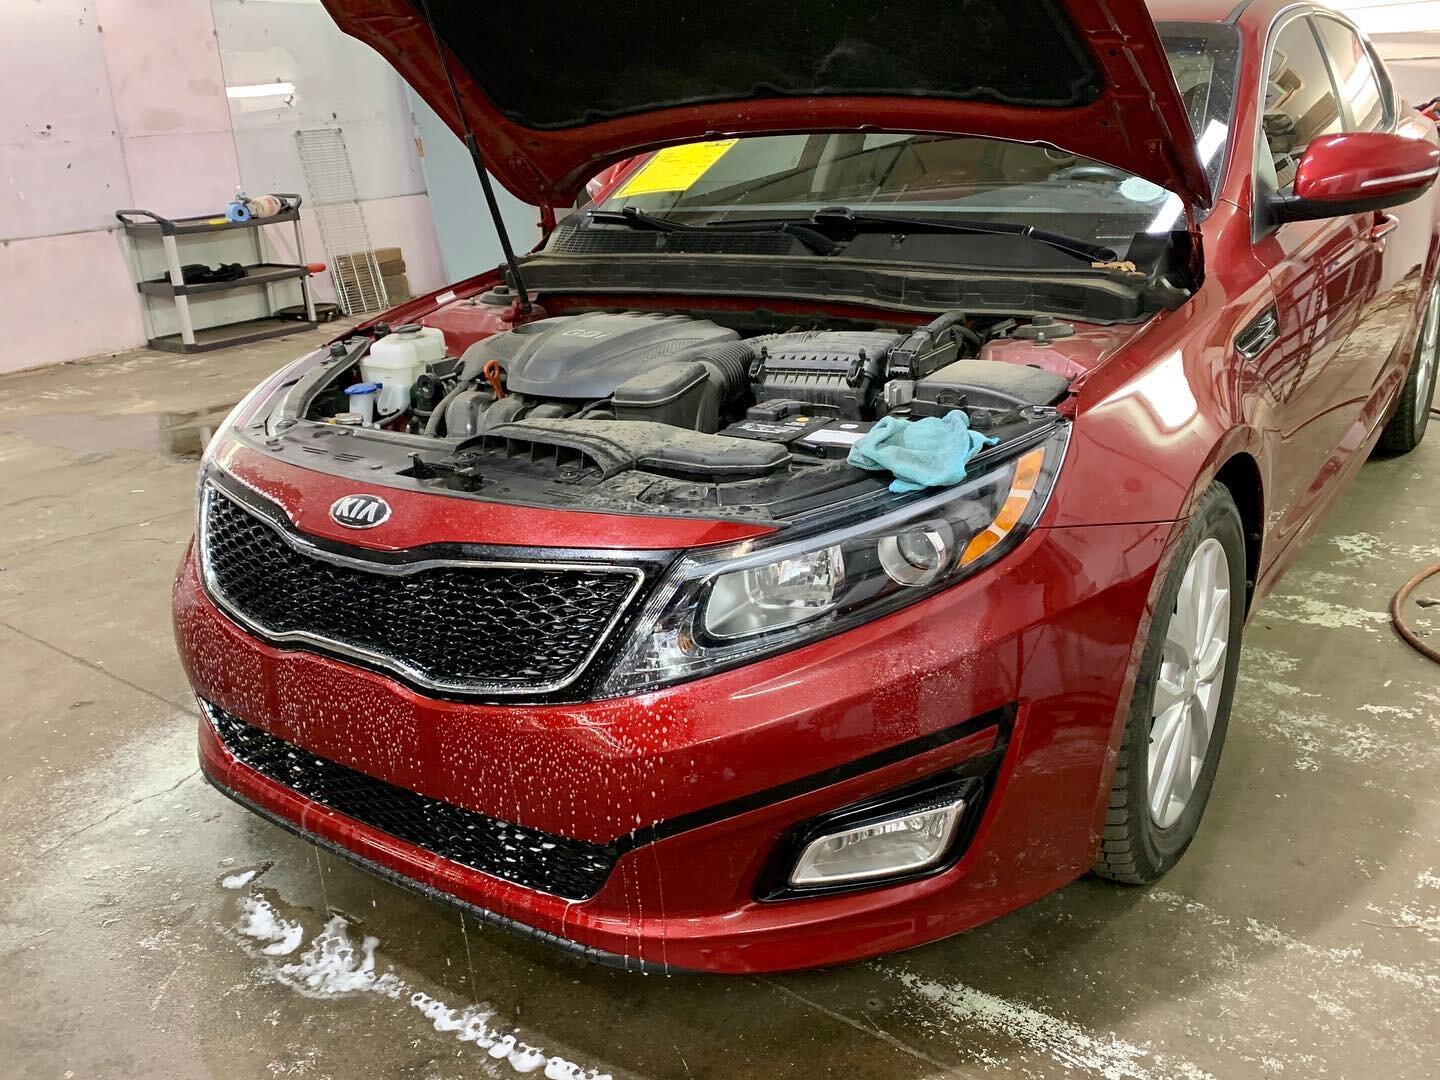 Kia in recently for a full front bumper ClearBra. 💠 What can we protect for you? 
#ClearBra #Boulder #Clear #Kia #Colorado #Cars #ClearChoice #Beautiful